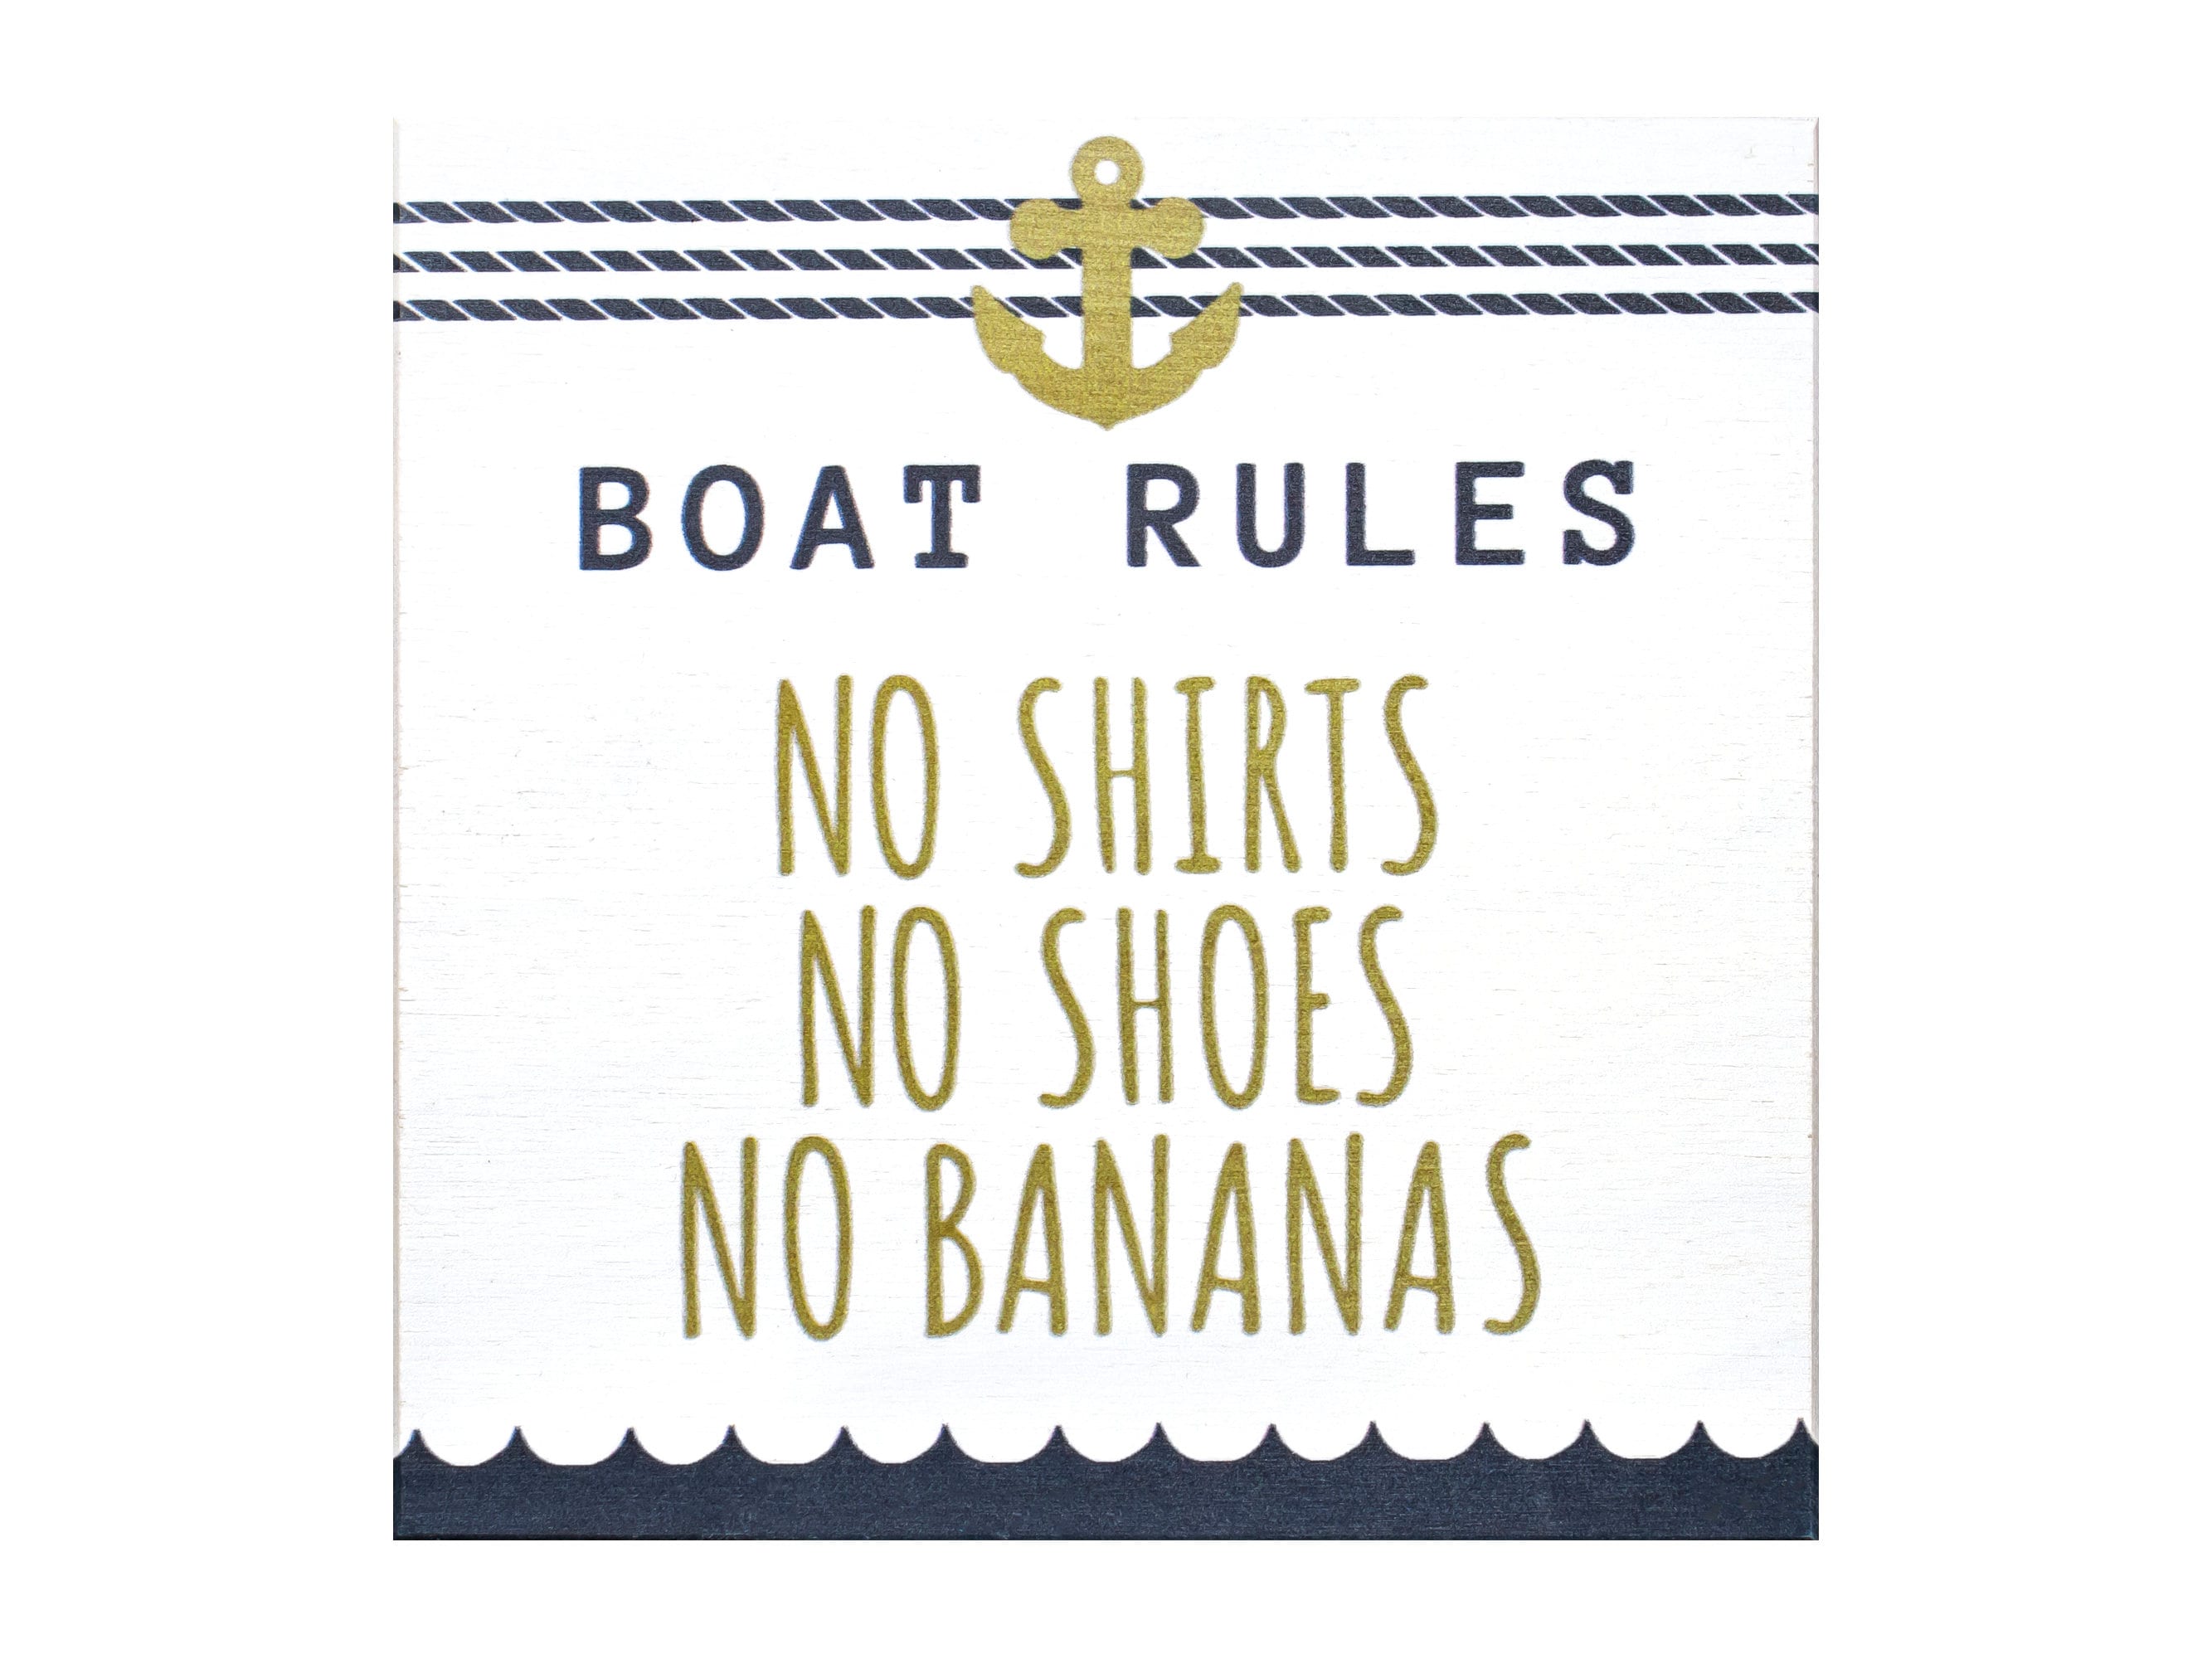 Gift for Boaters, Boat Owner Gifts, Funny Boat Sign, No Bananas on the Boat  Sign, Boat Rules Decor, Boat Humor -  New Zealand